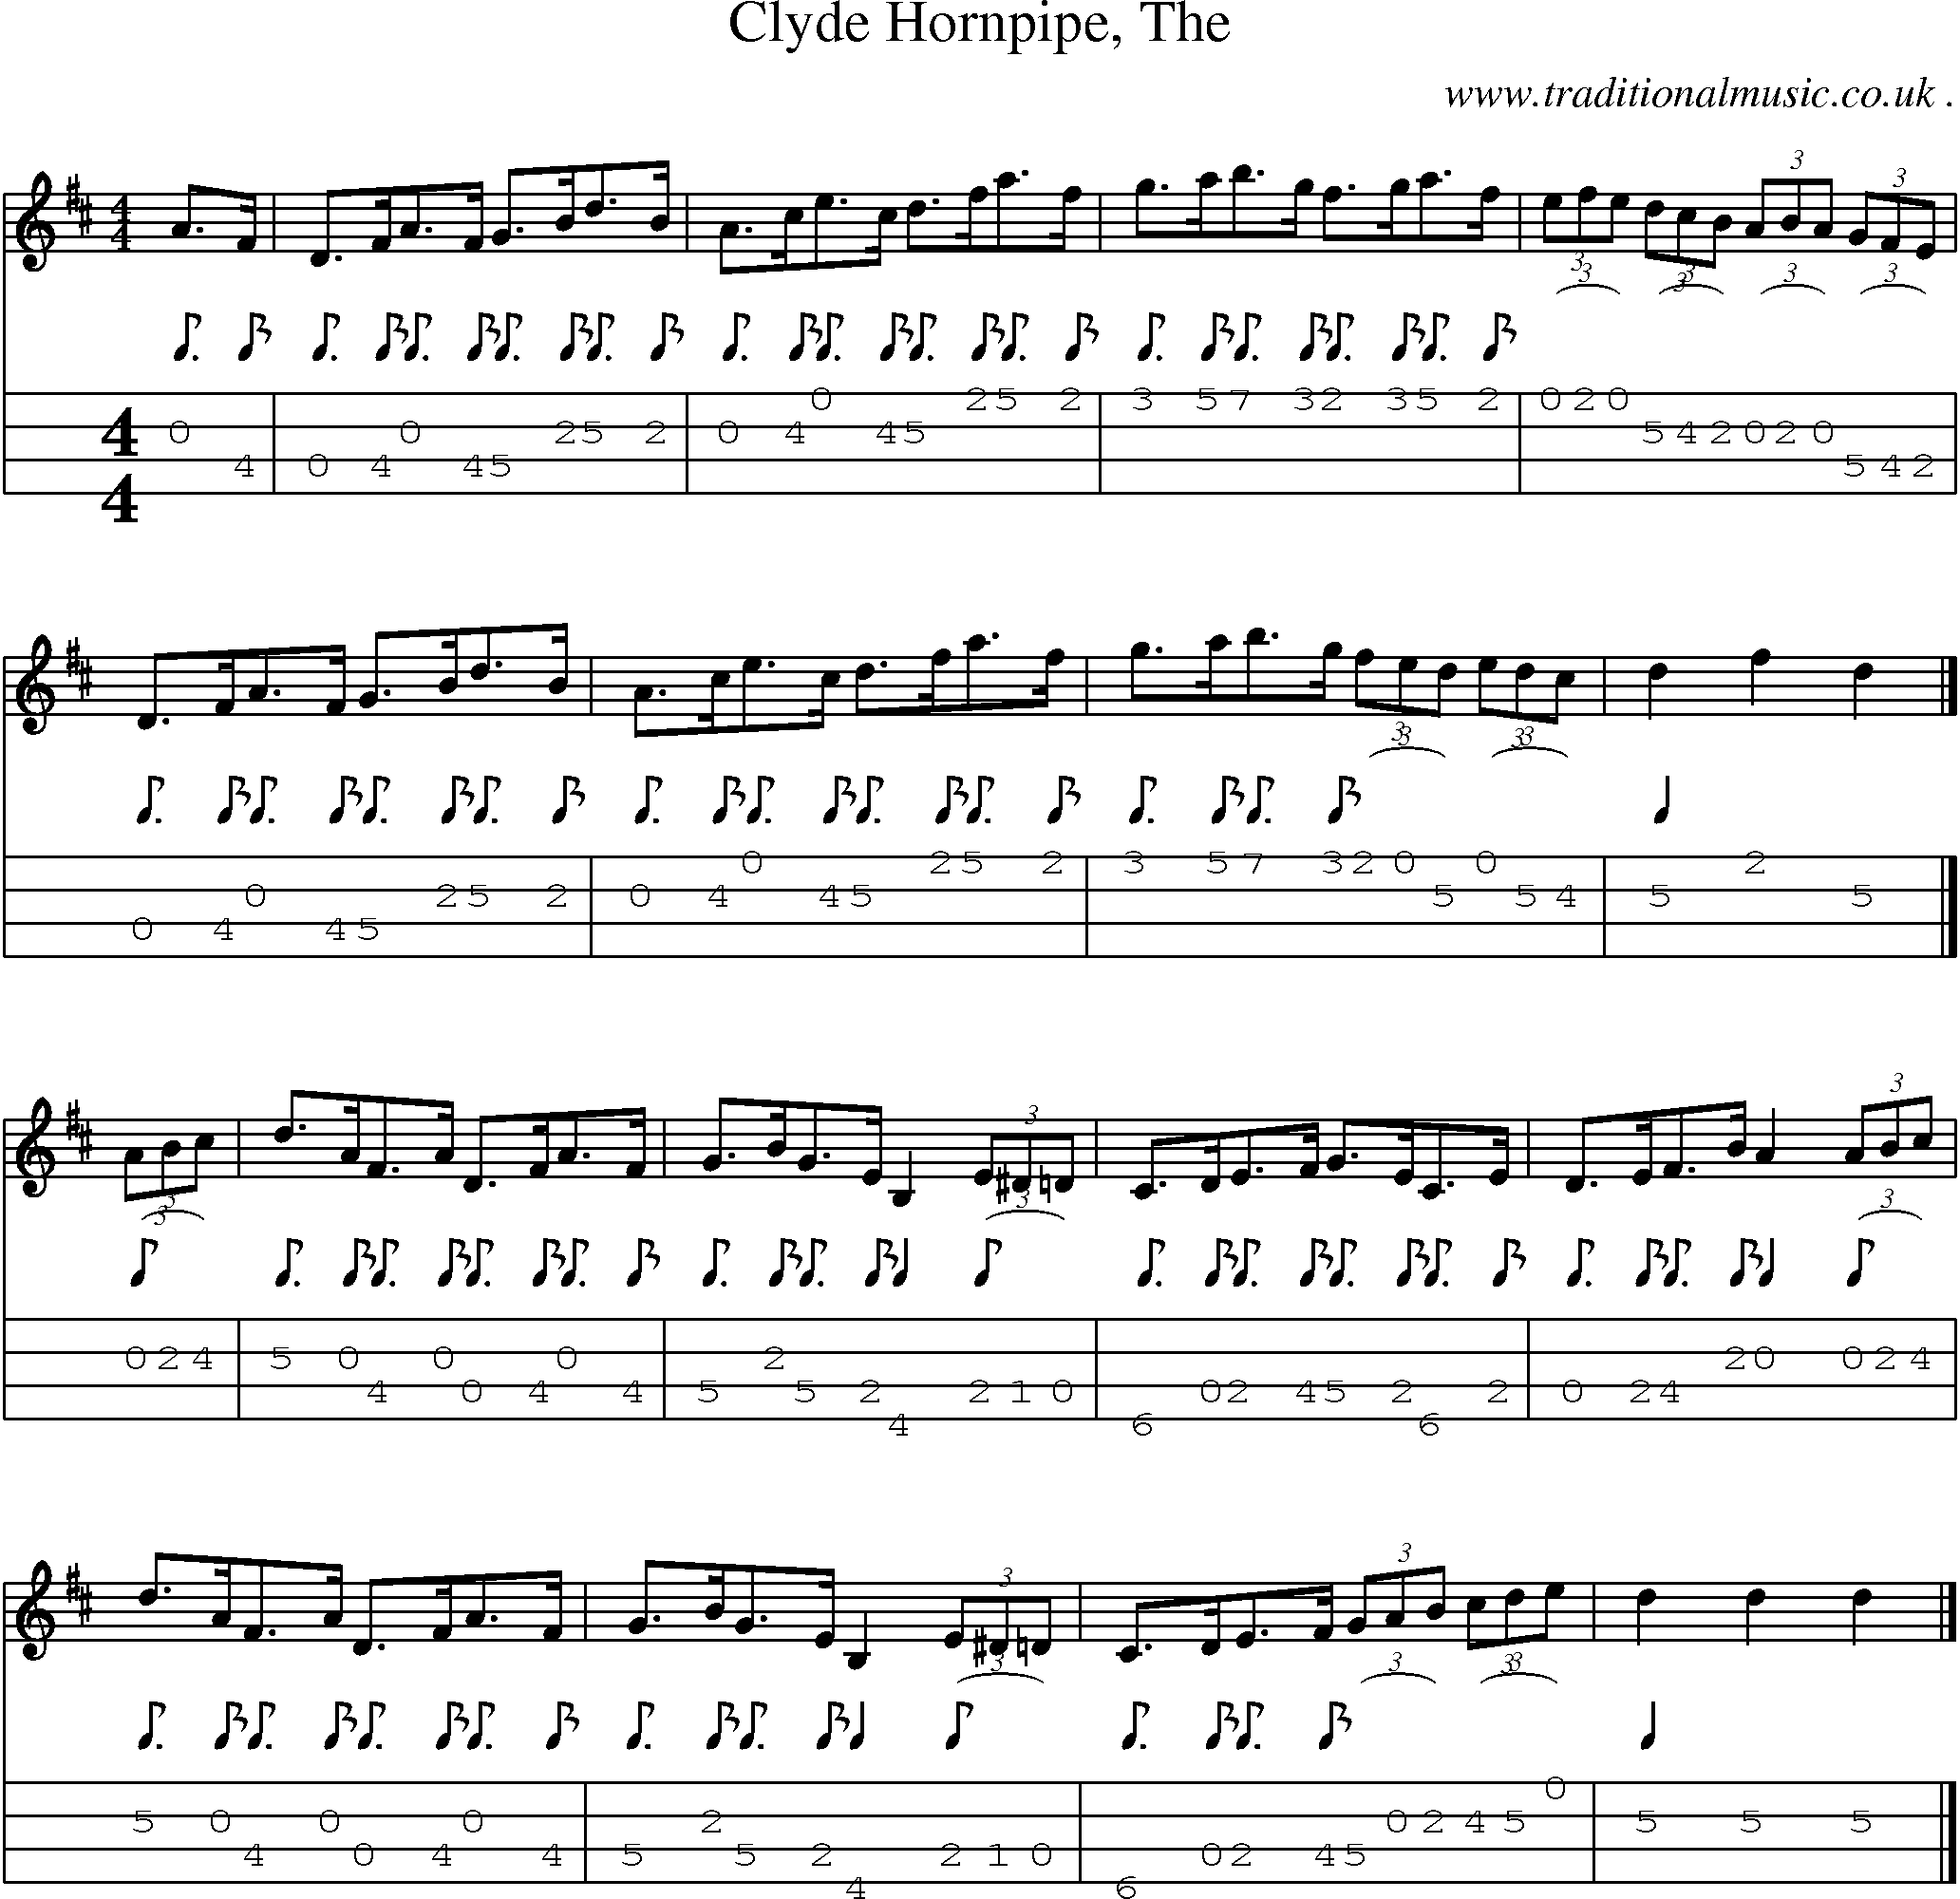 Sheet-music  score, Chords and Mandolin Tabs for Clyde Hornpipe The